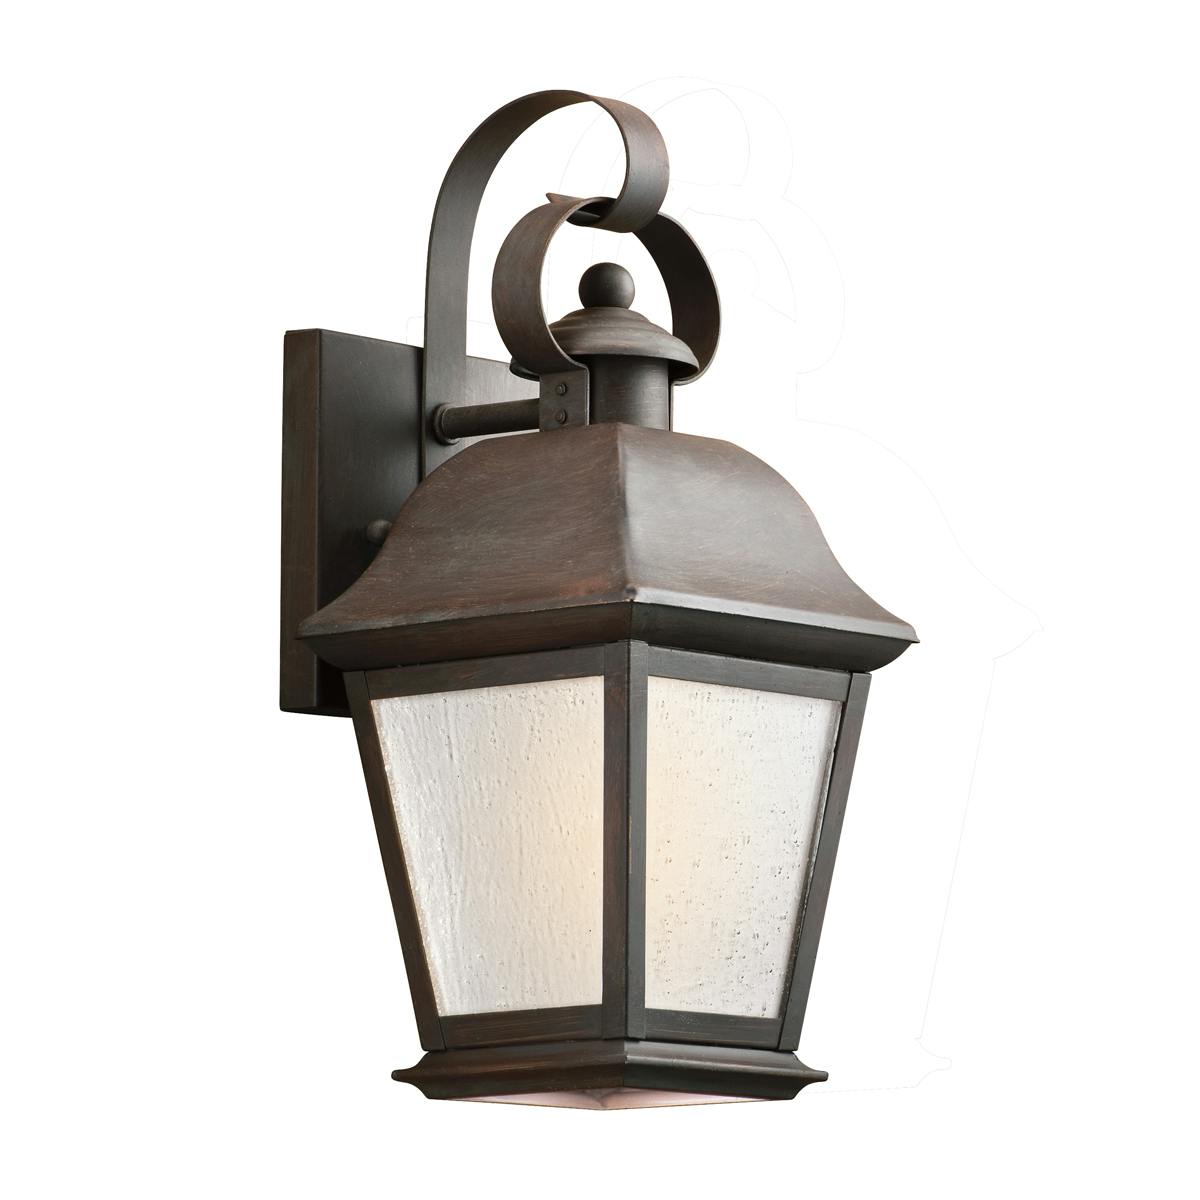 Rustic wall mounted outdoor light in medium bronze finish with textured glass